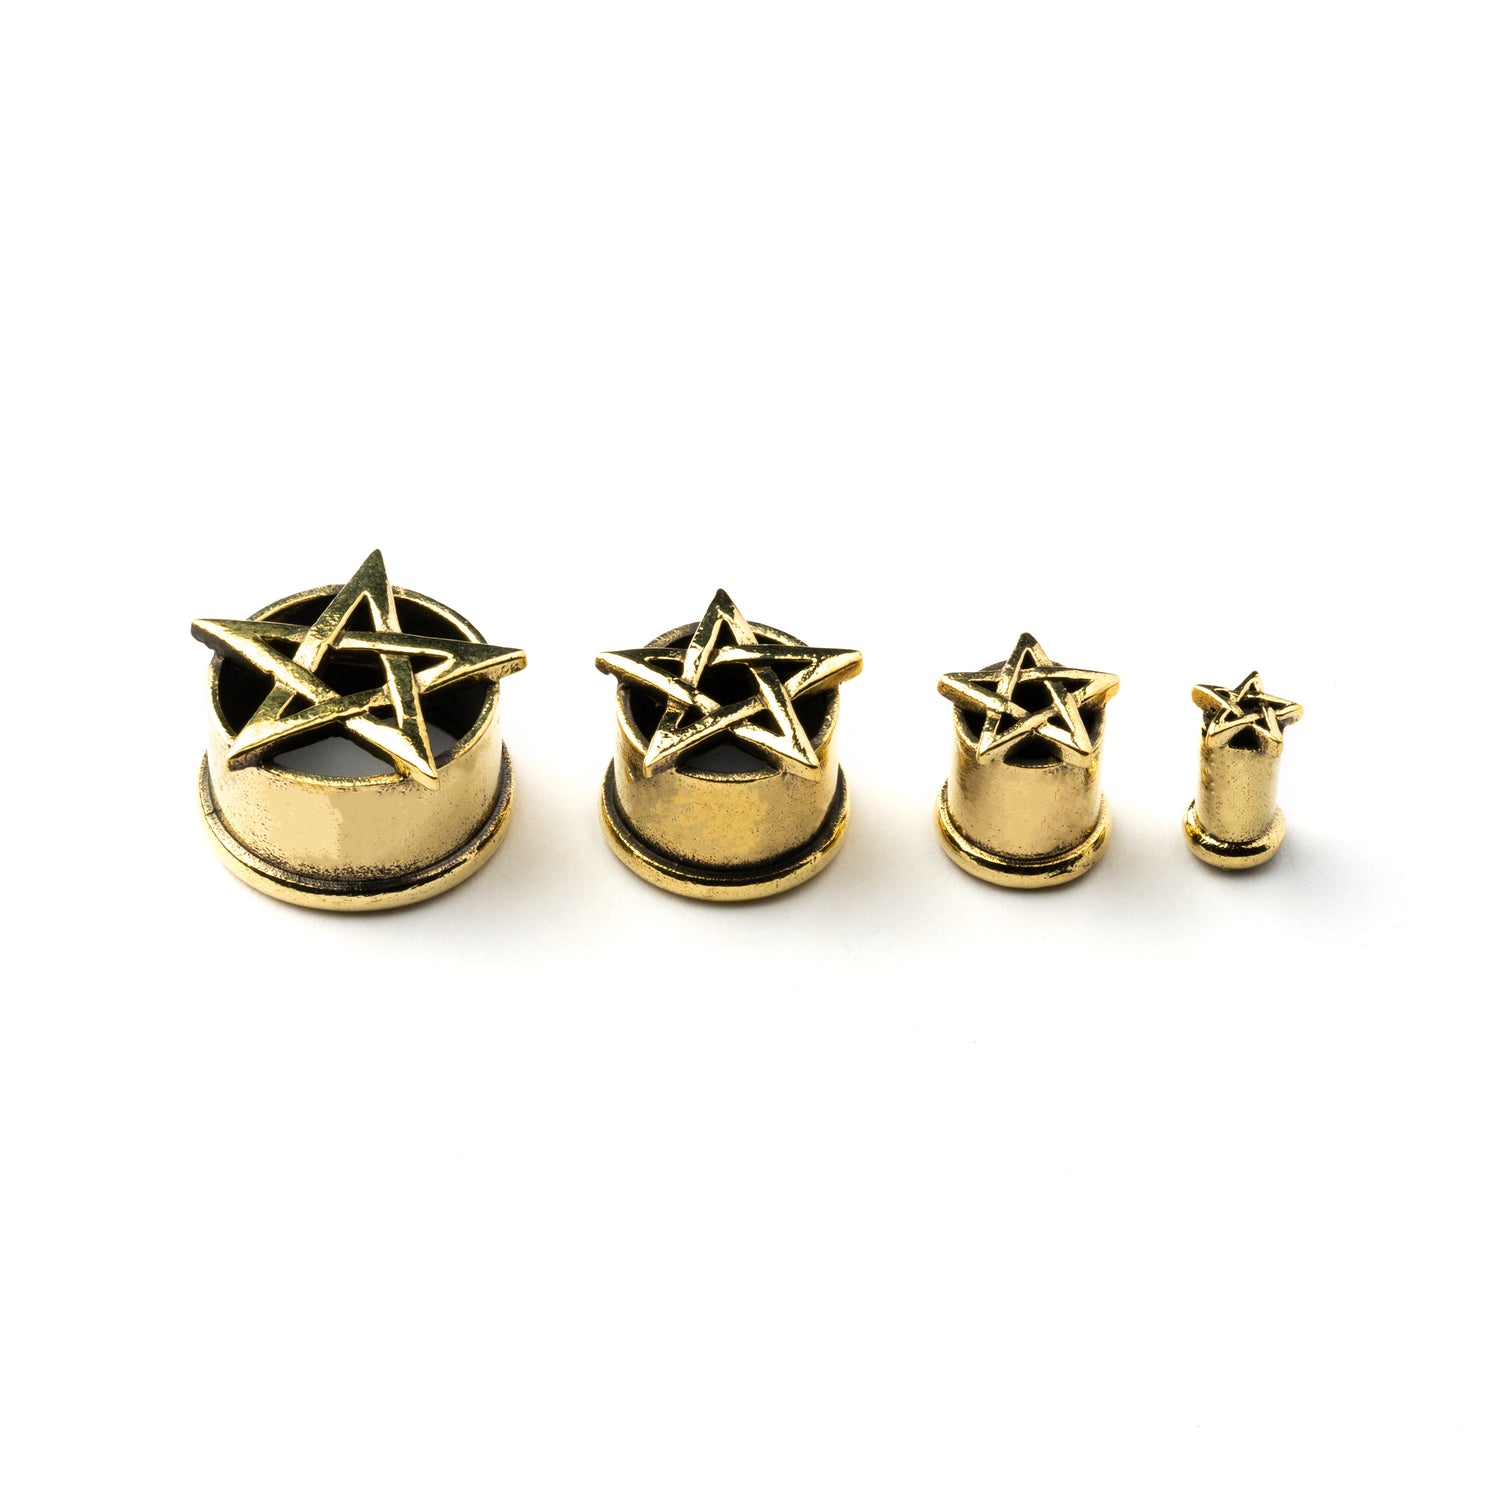 several sizes of Brass Pentagram plugs front and side view